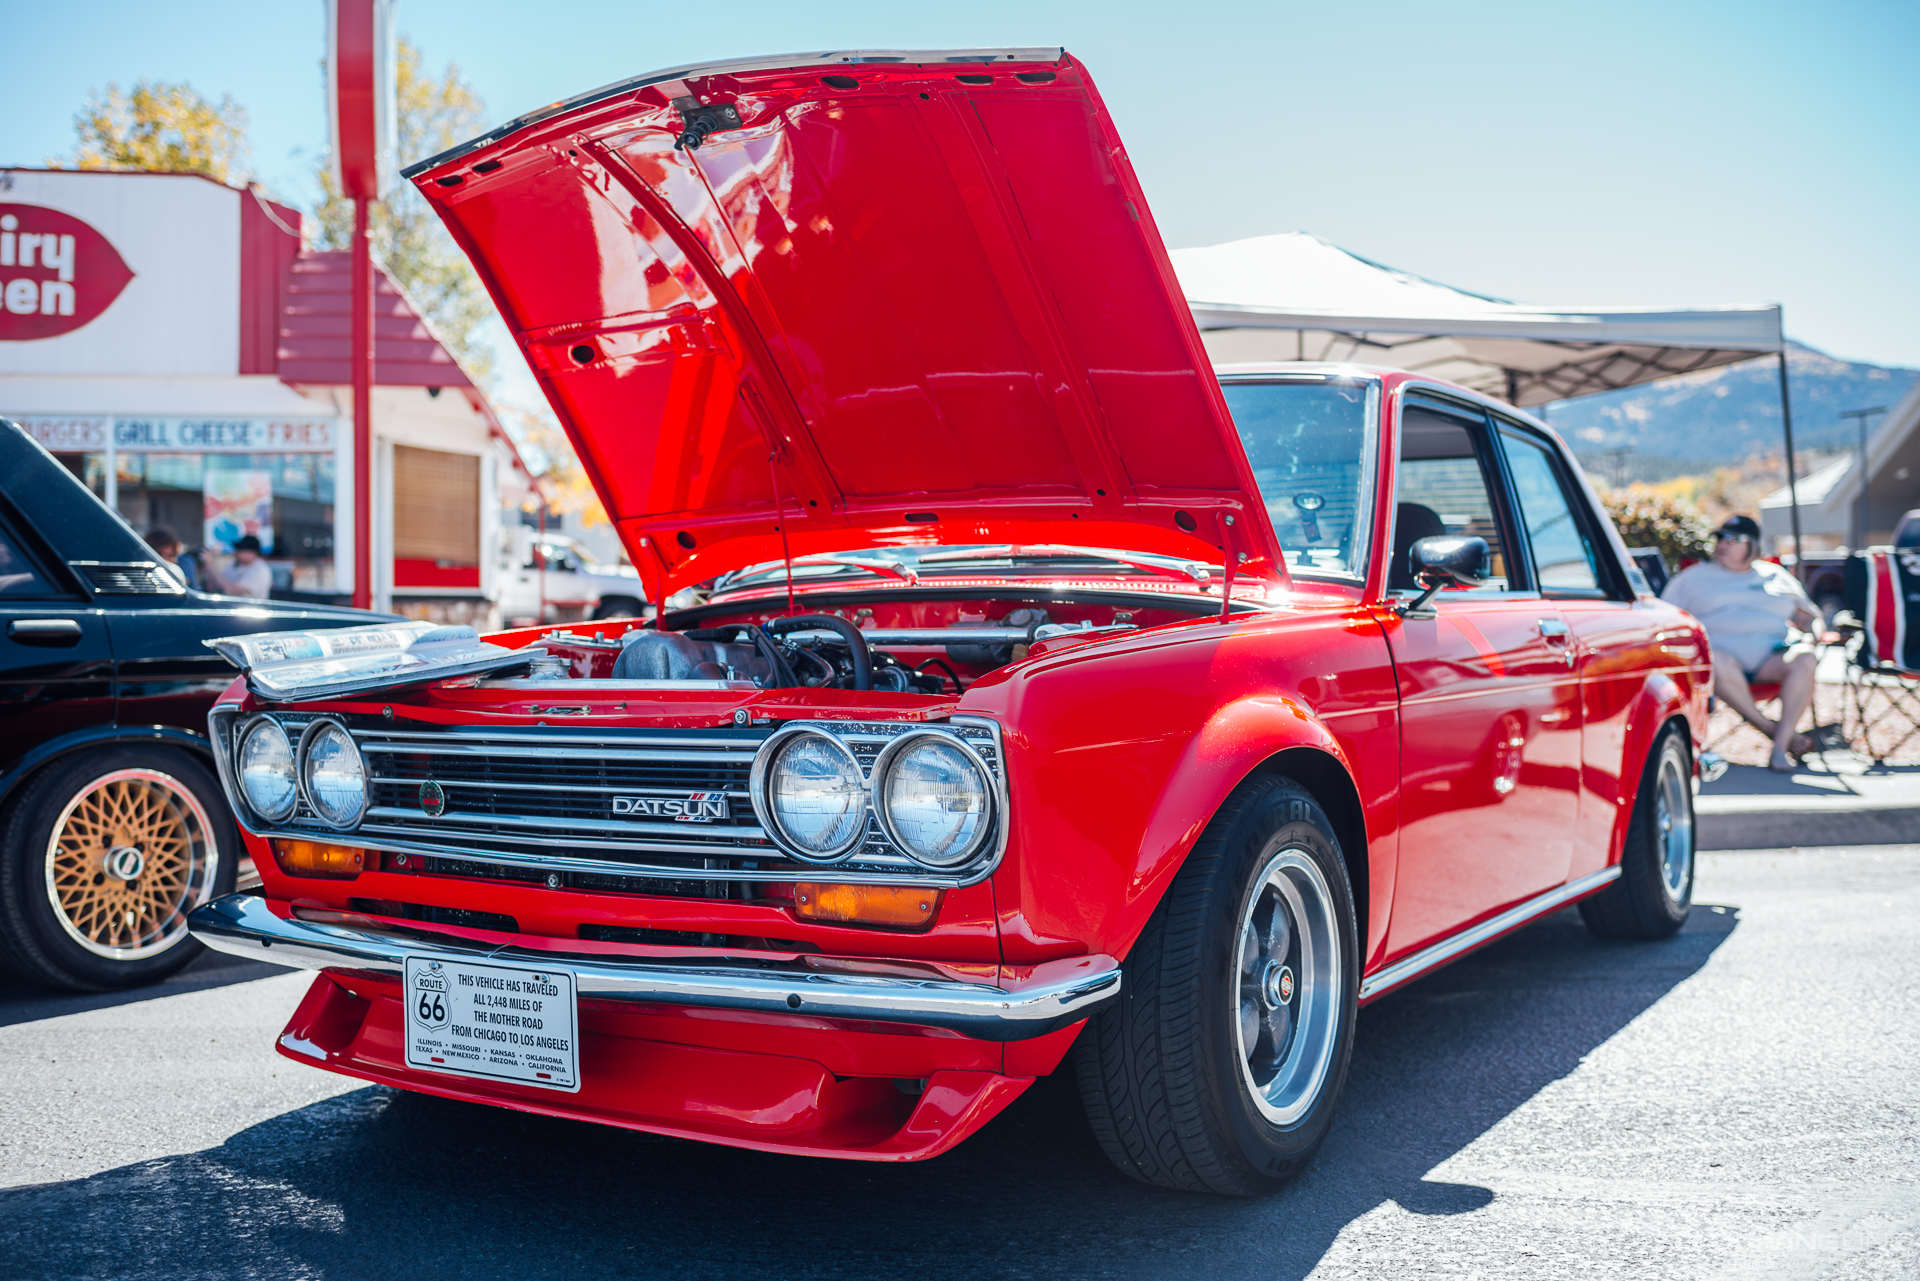 4 Standout Datsuns at the Multi-State Datsun Classic Meet Dr